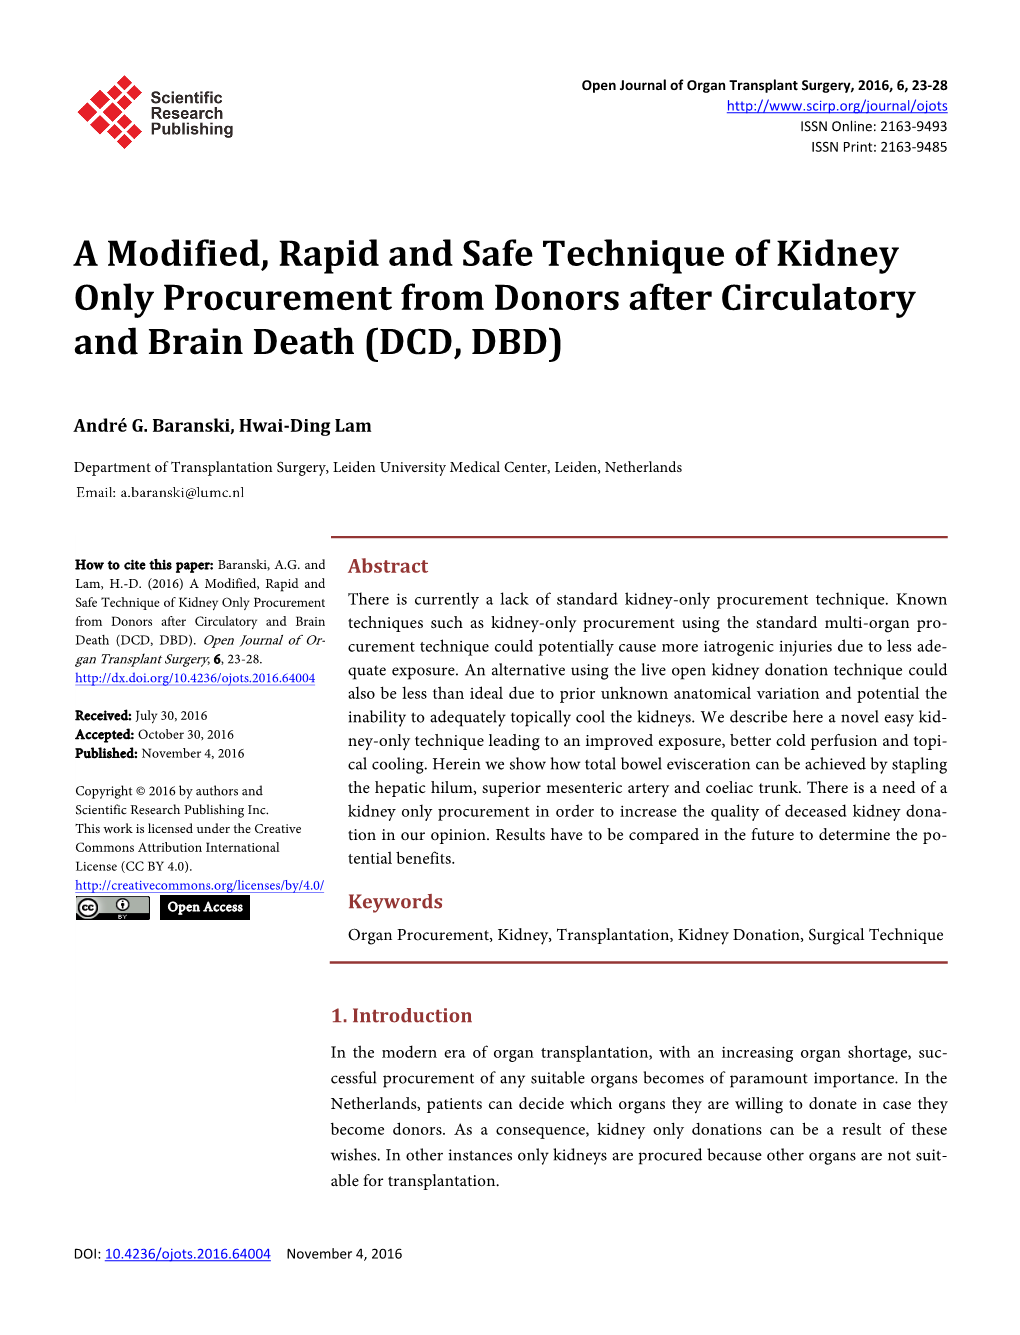 A Modified, Rapid and Safe Technique of Kidney Only Procurement from Donors After Circulatory and Brain Death (DCD, DBD)